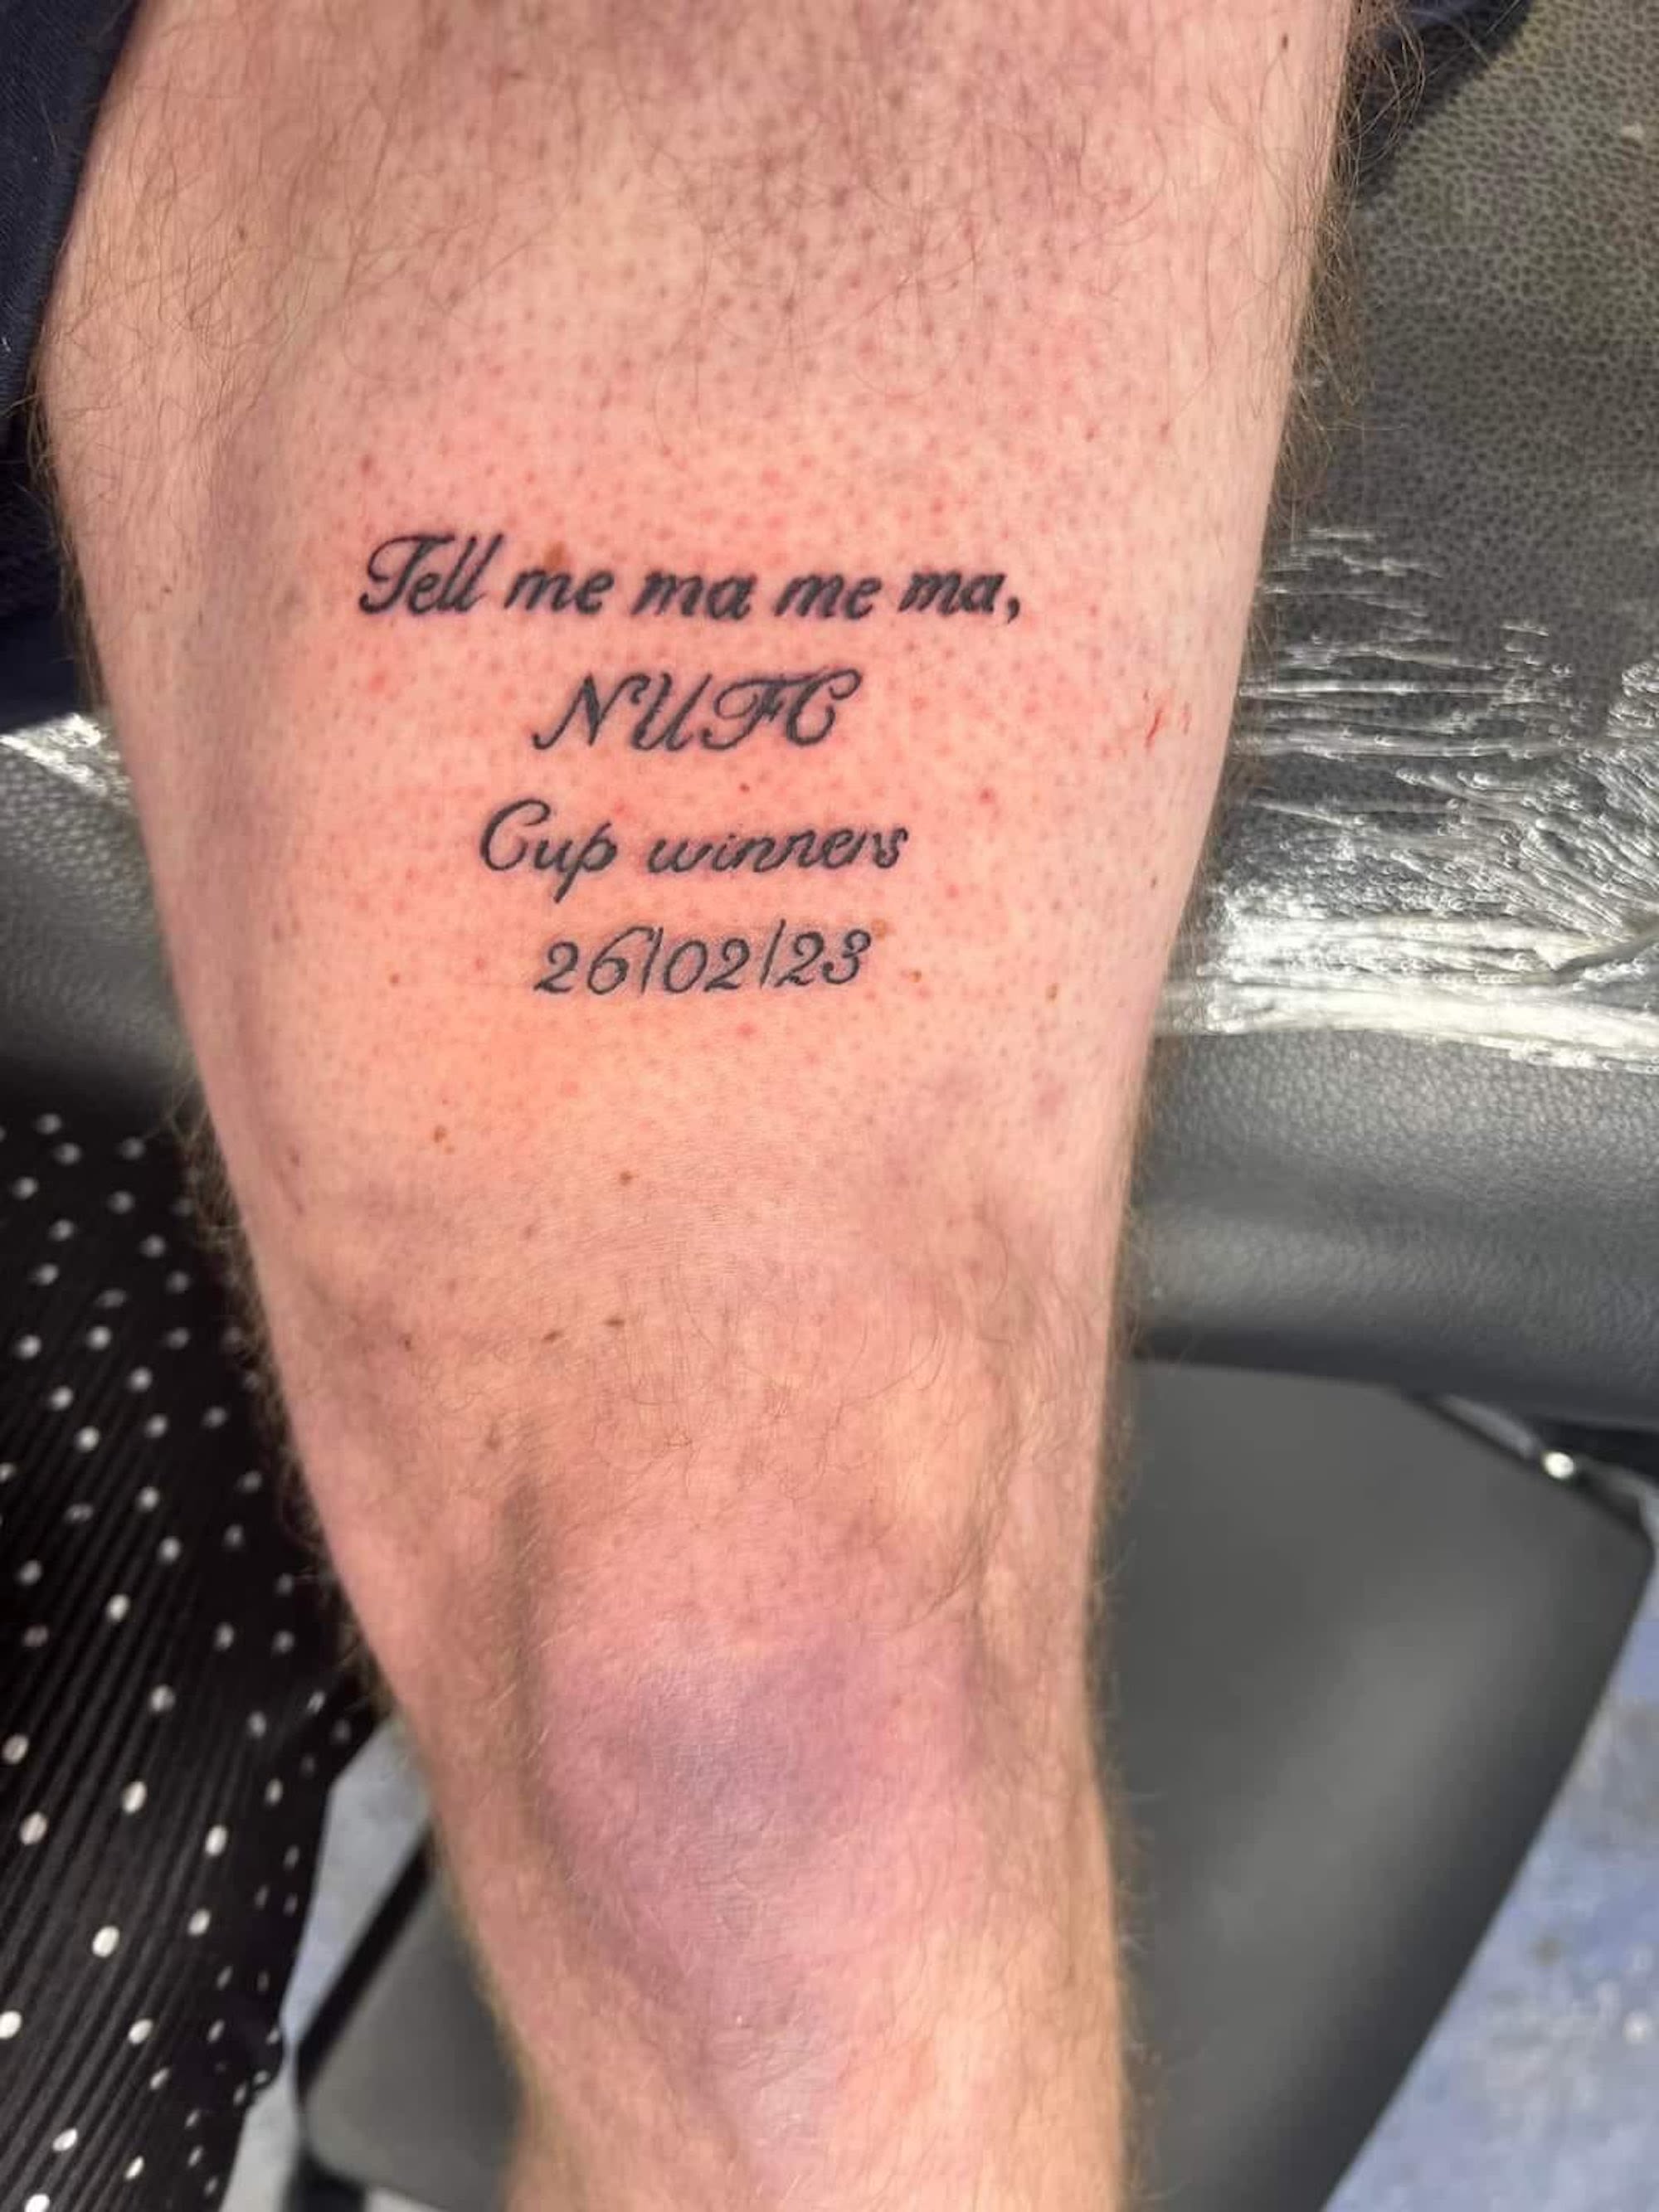 Newcastle United fan left red-faced after premature celebratory tattoo | CNN